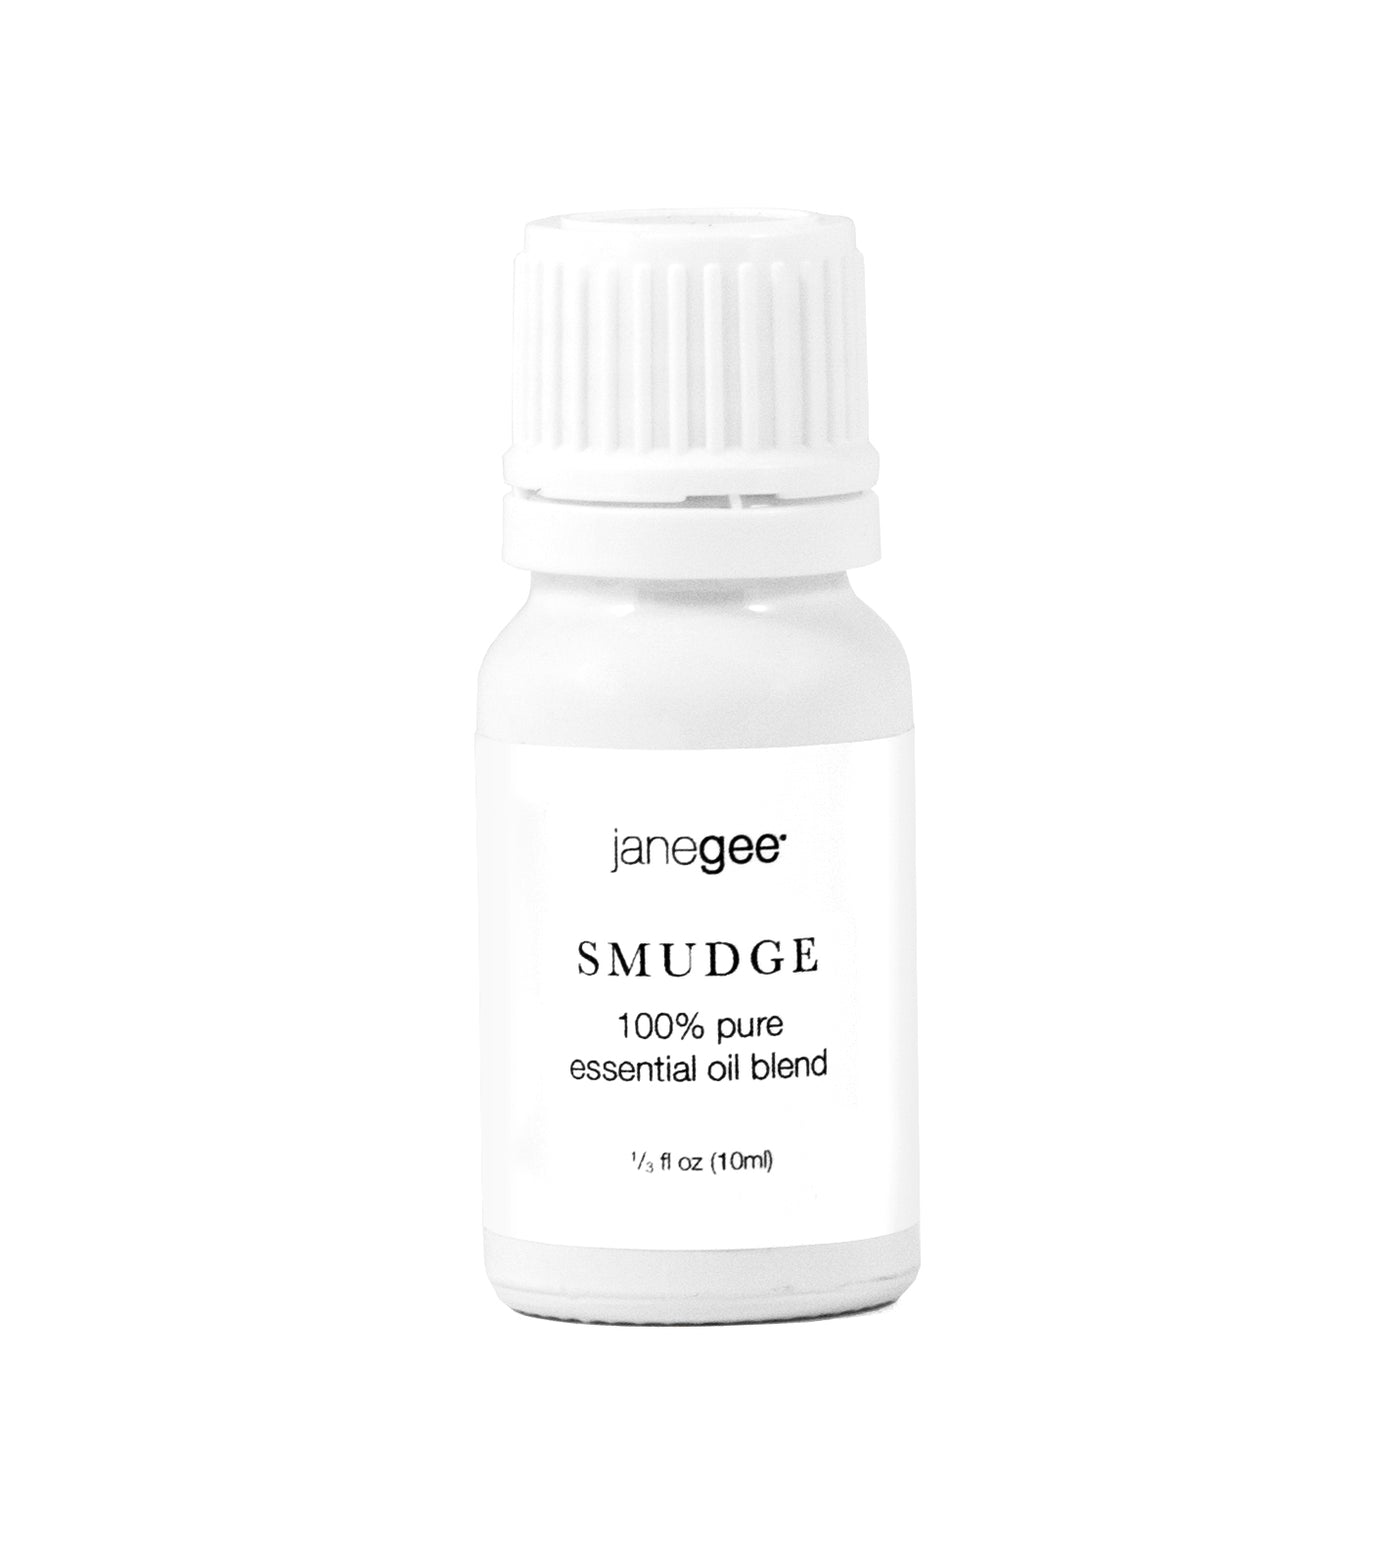 janegee Smudge Essential Oil Blend